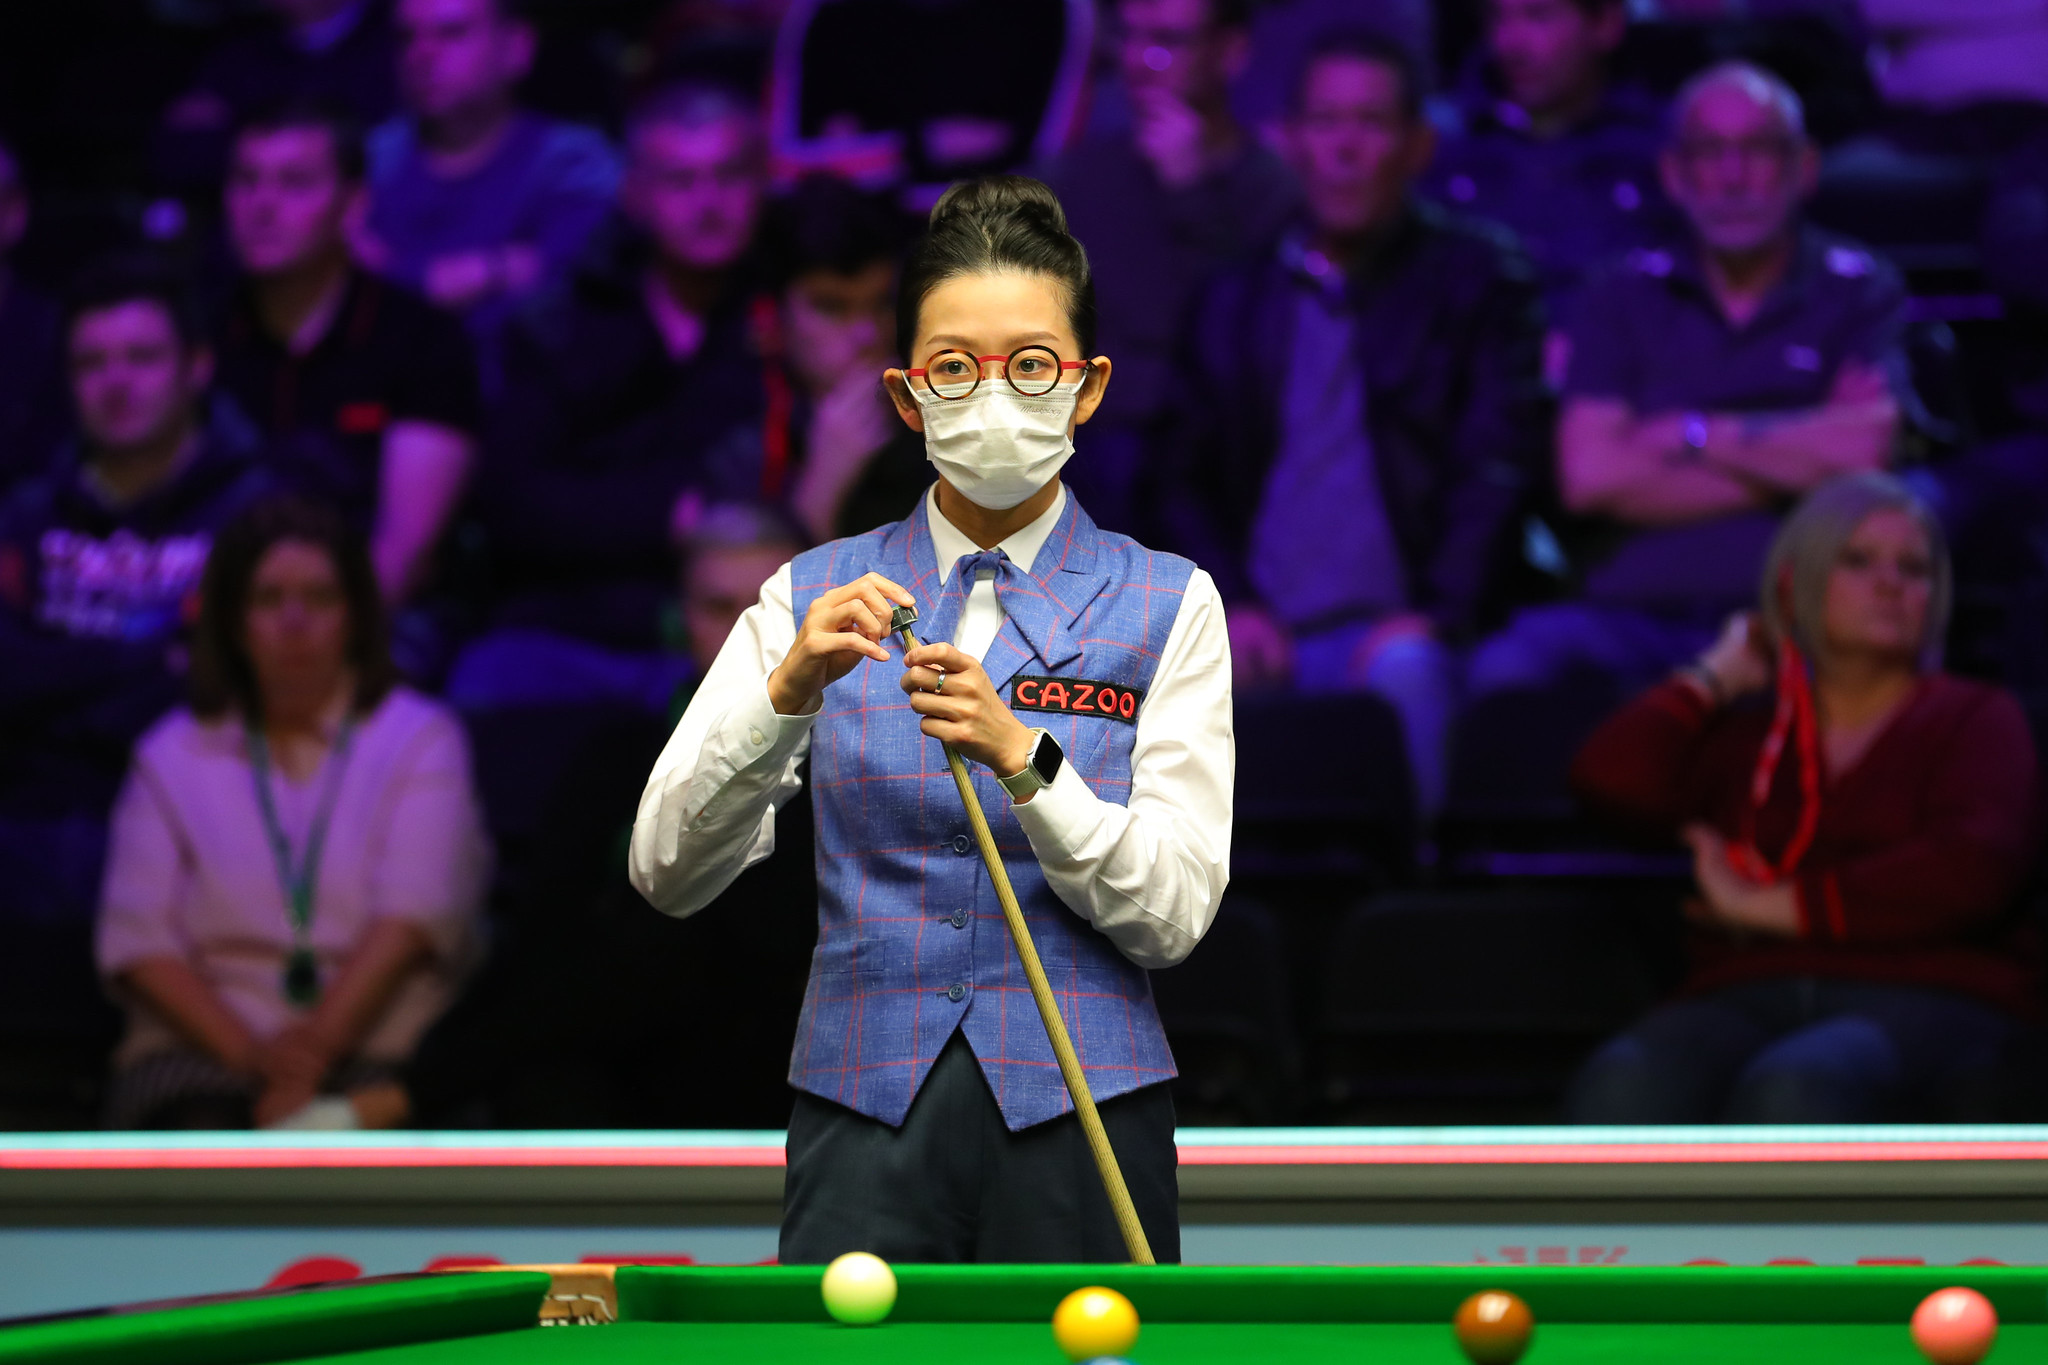 Records WWS Womens Snooker